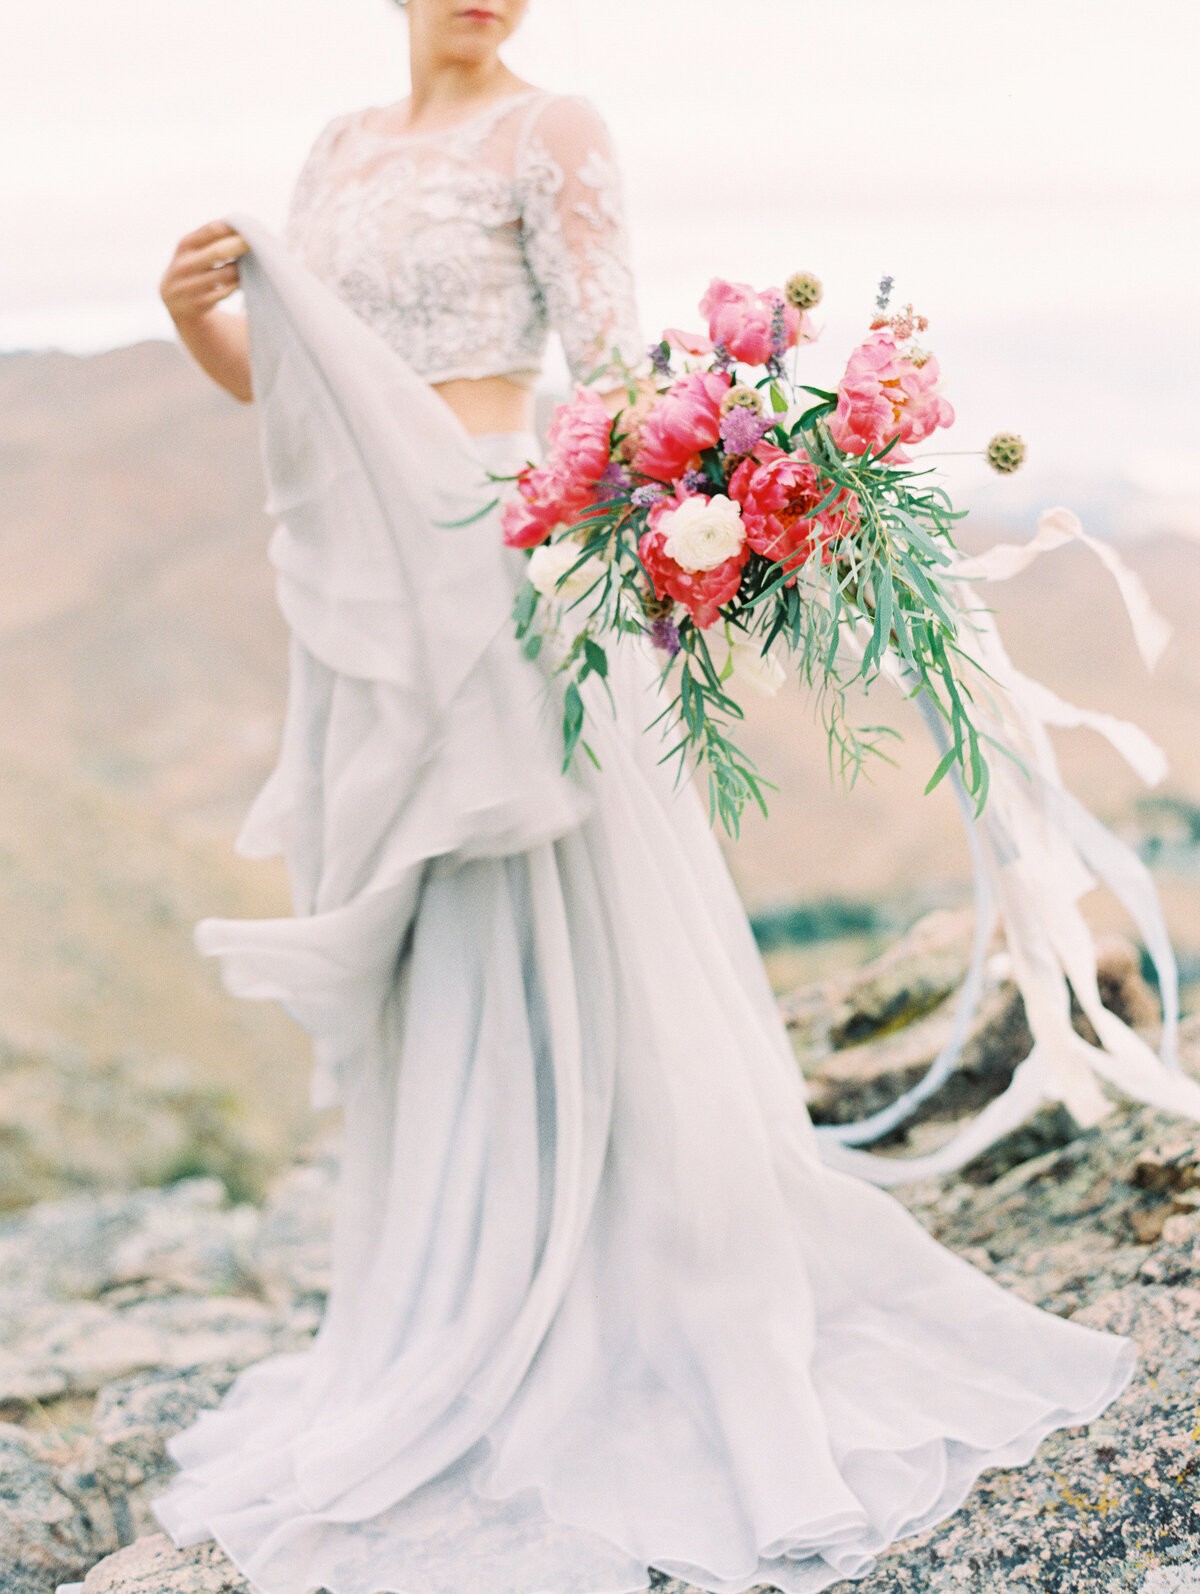 Sunrise Elopement Photos in Leanne Marshall-25